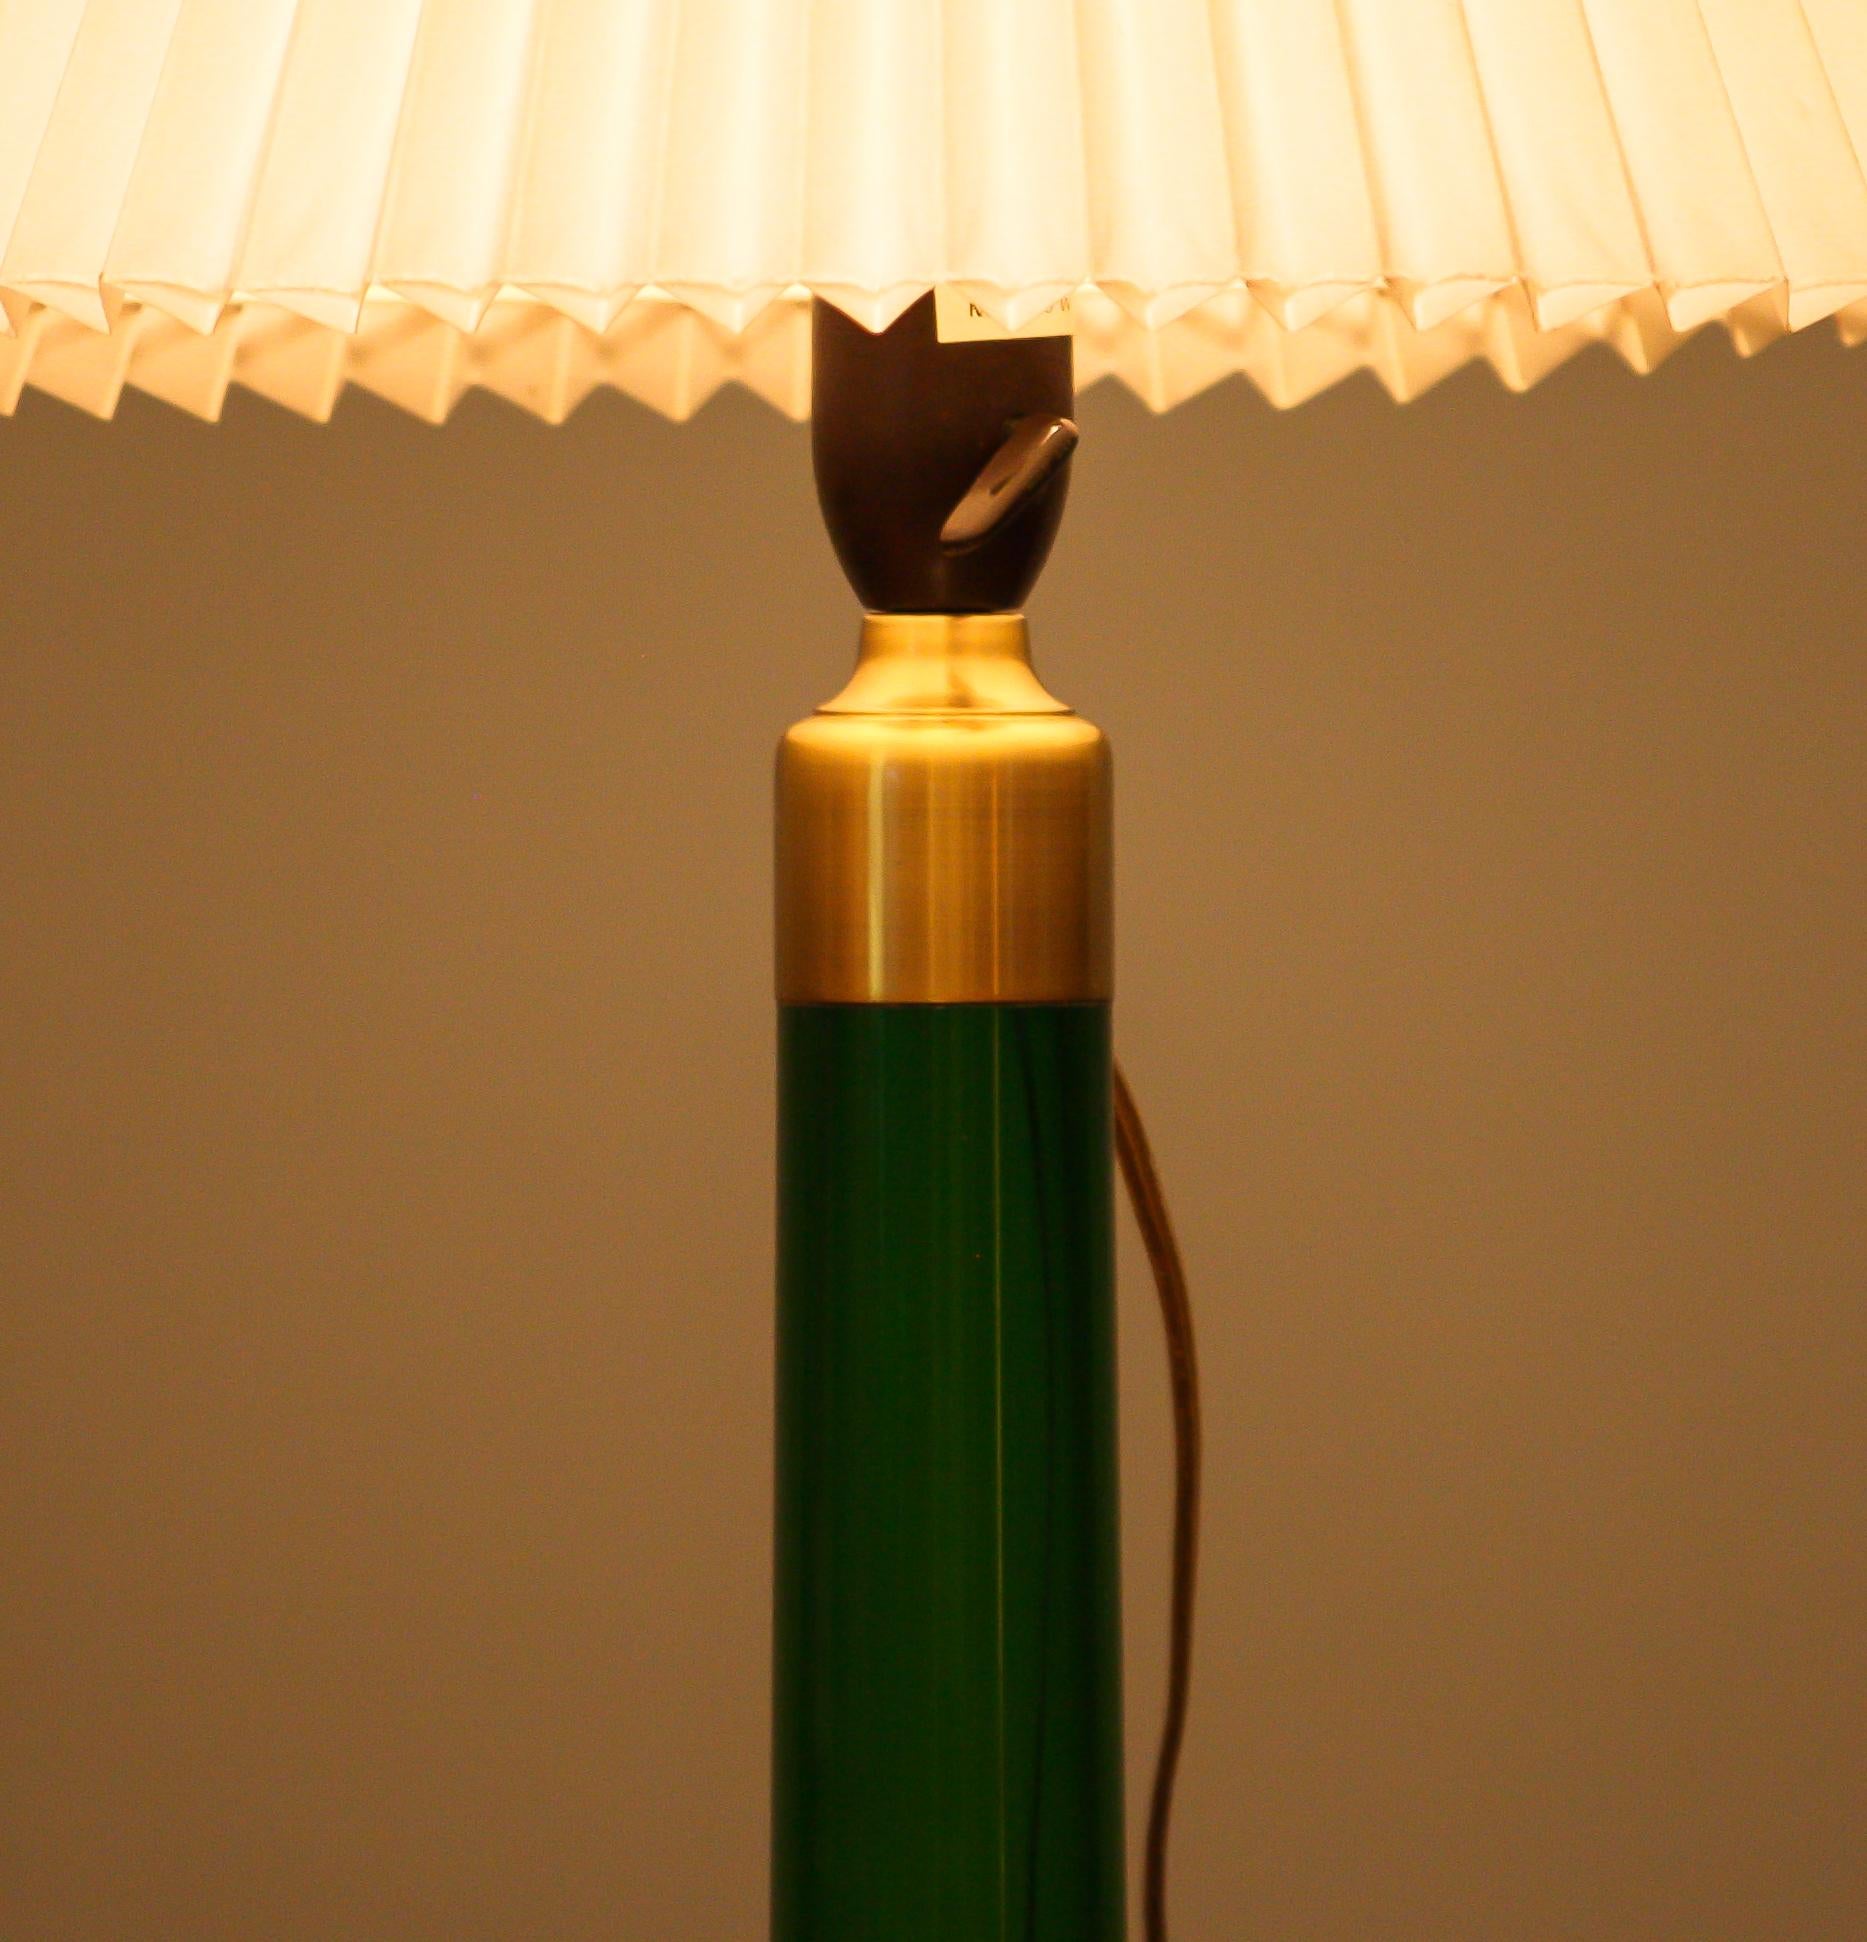 This green, glass, table lamp is manufactured by Holmegaard, Denmark, 1960s.
The elegant design with the slim waist makes the table lamp extremely beautiful.
In perfect condition and technically 100%.
One E26 / E27 bulb. Maximum 75